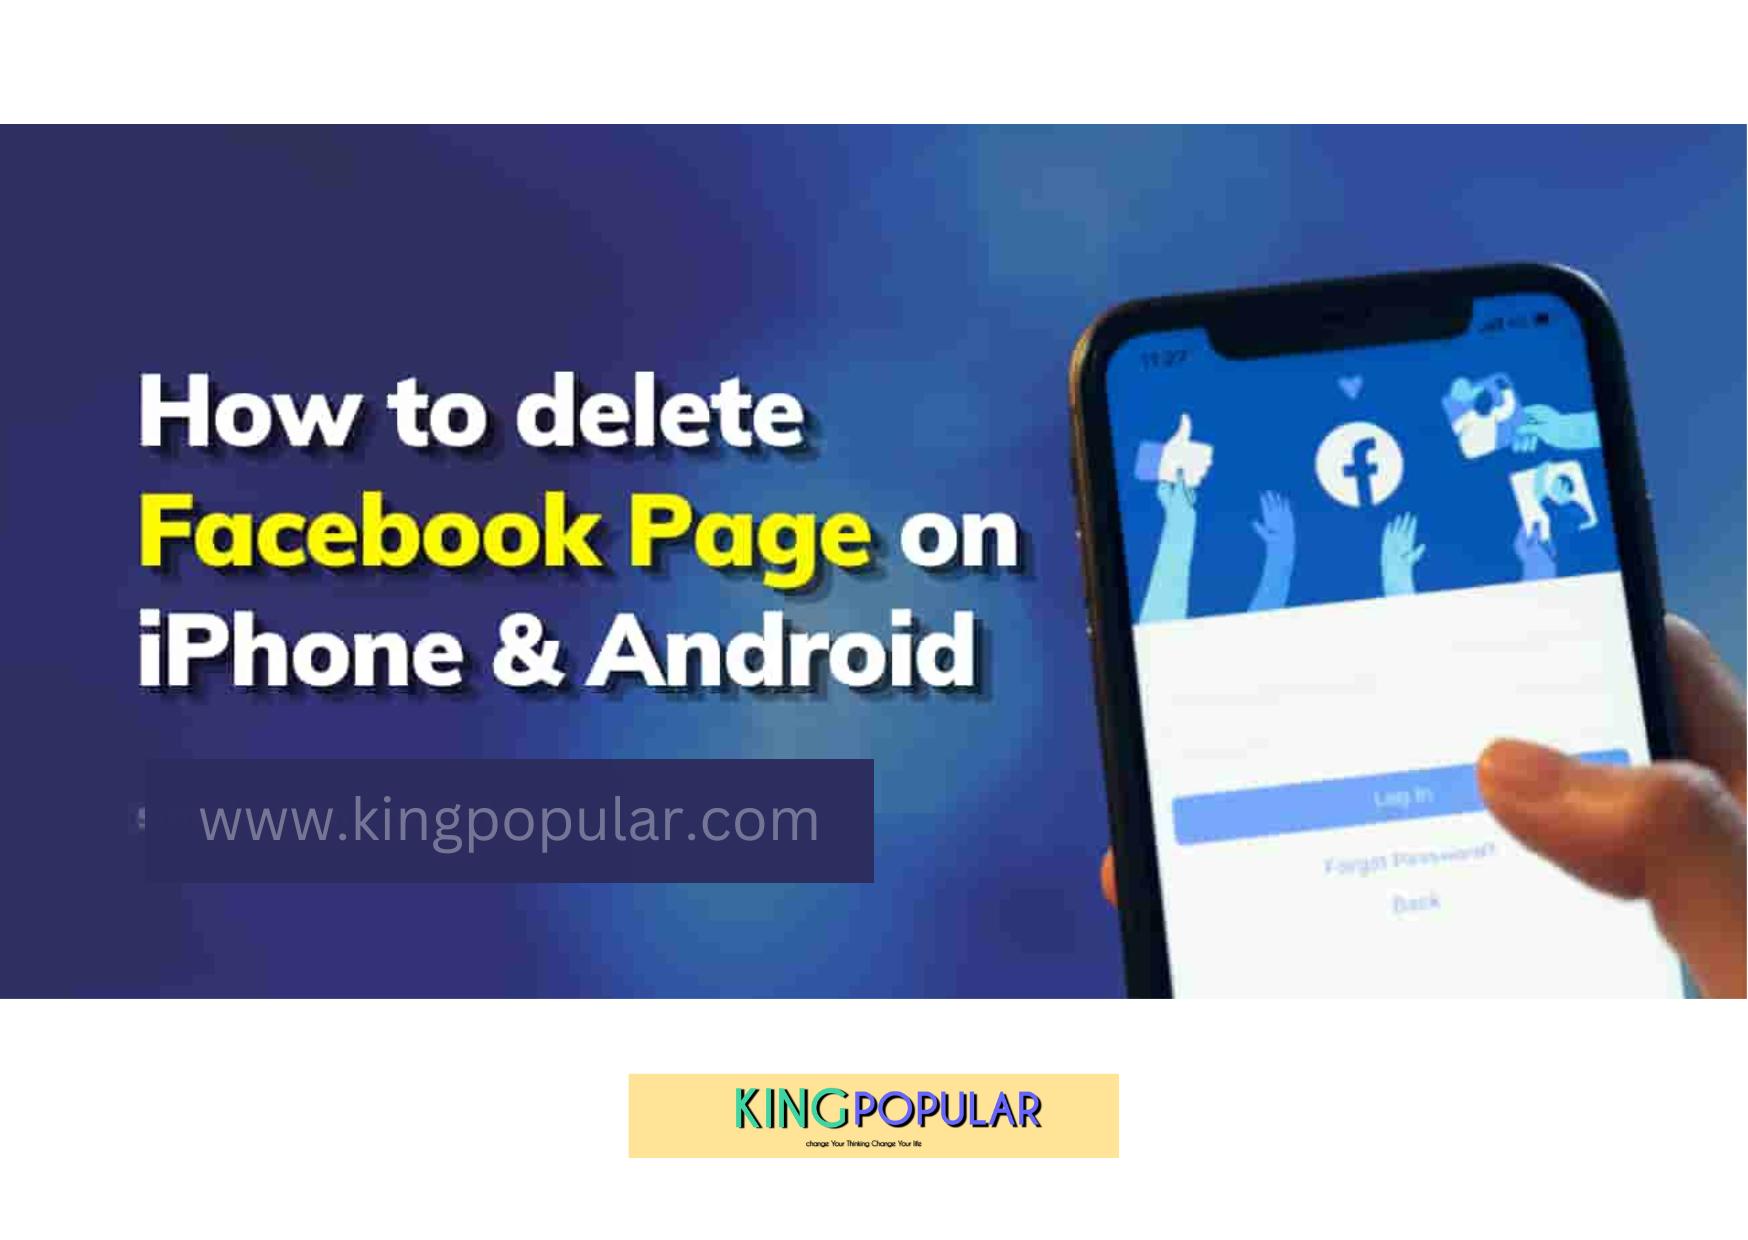 How to delete a facebook page on Android & iPhone